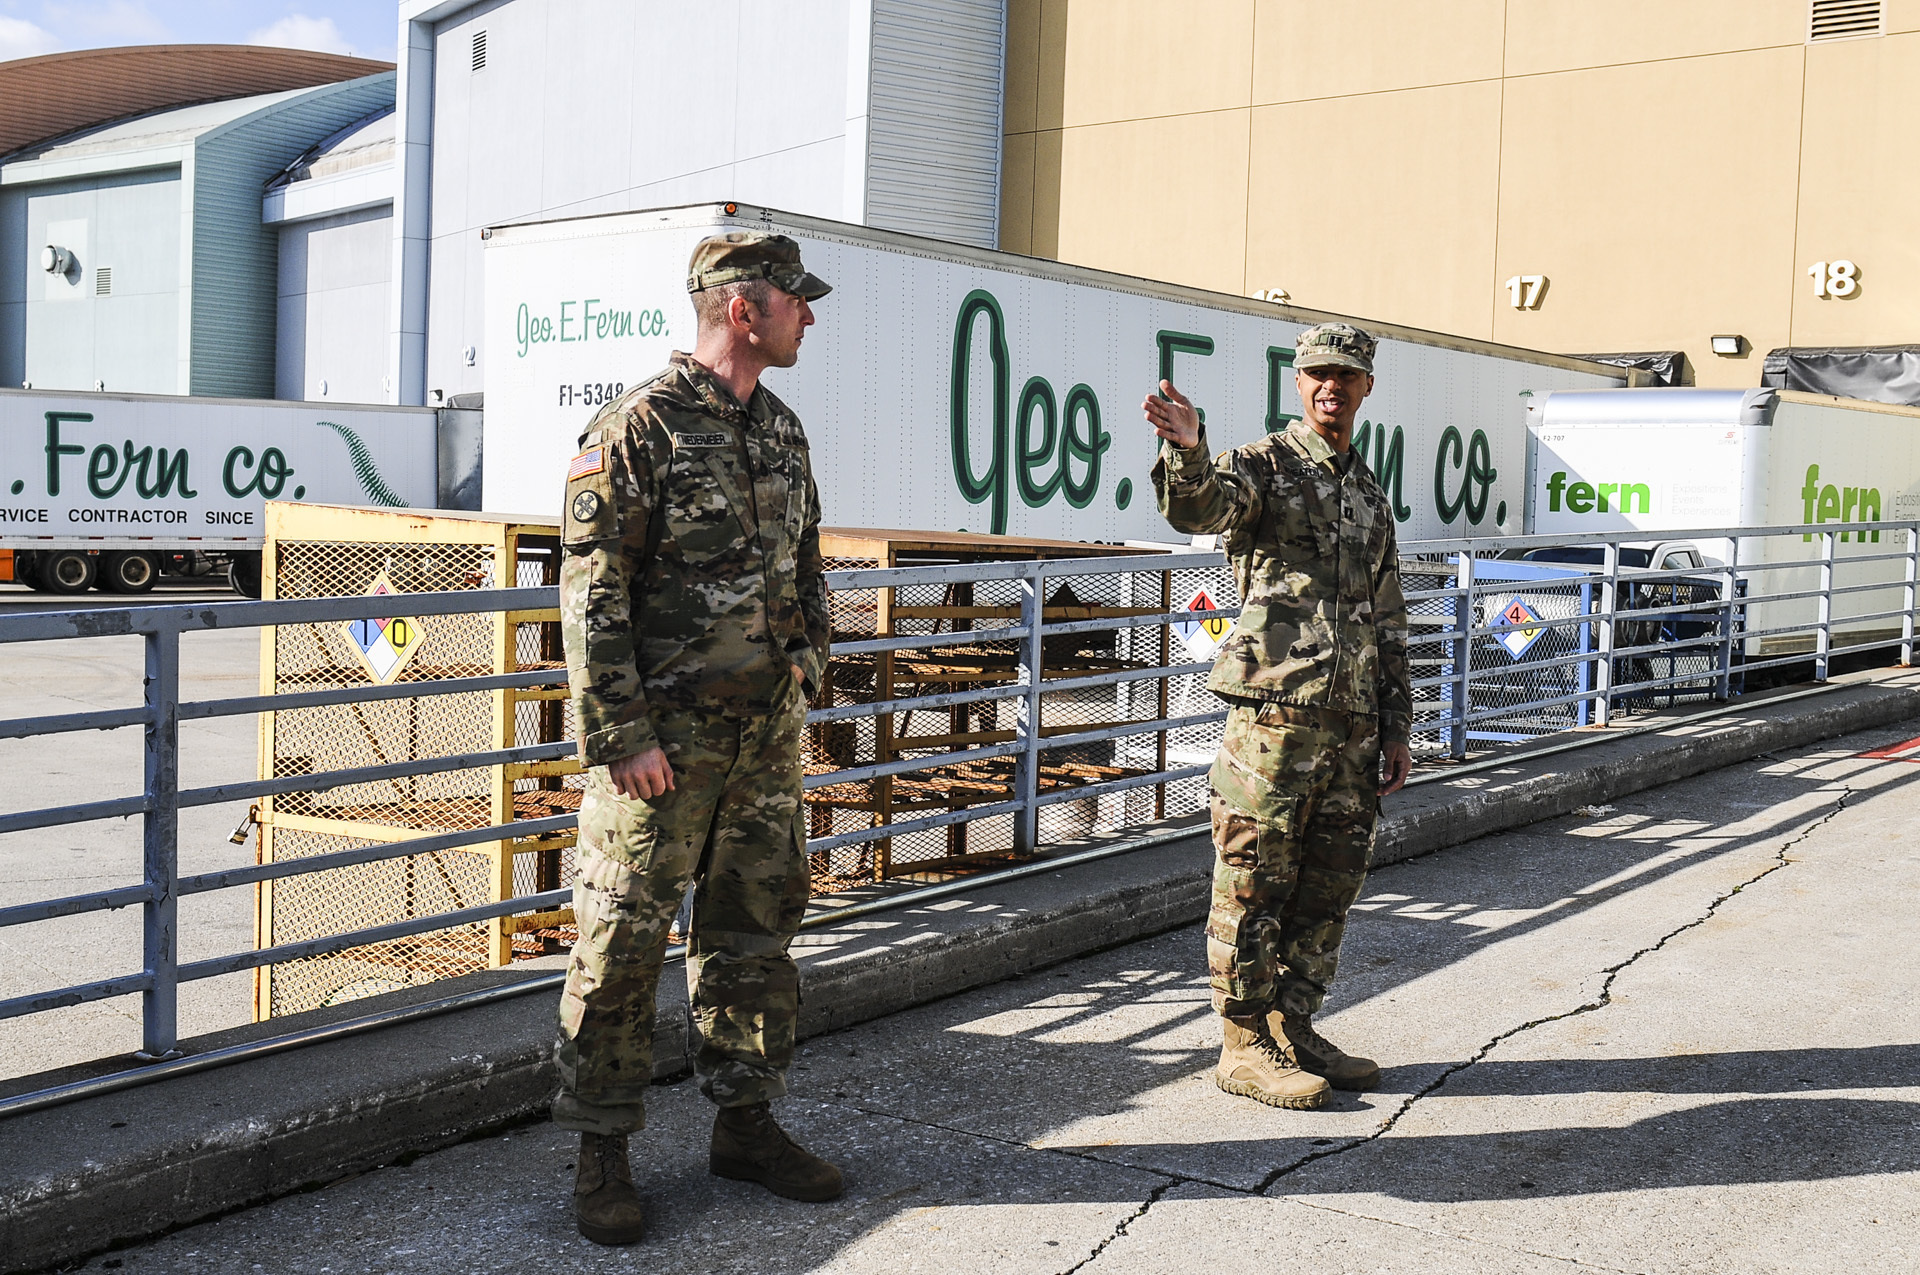 Soldiers standing on loading docks.